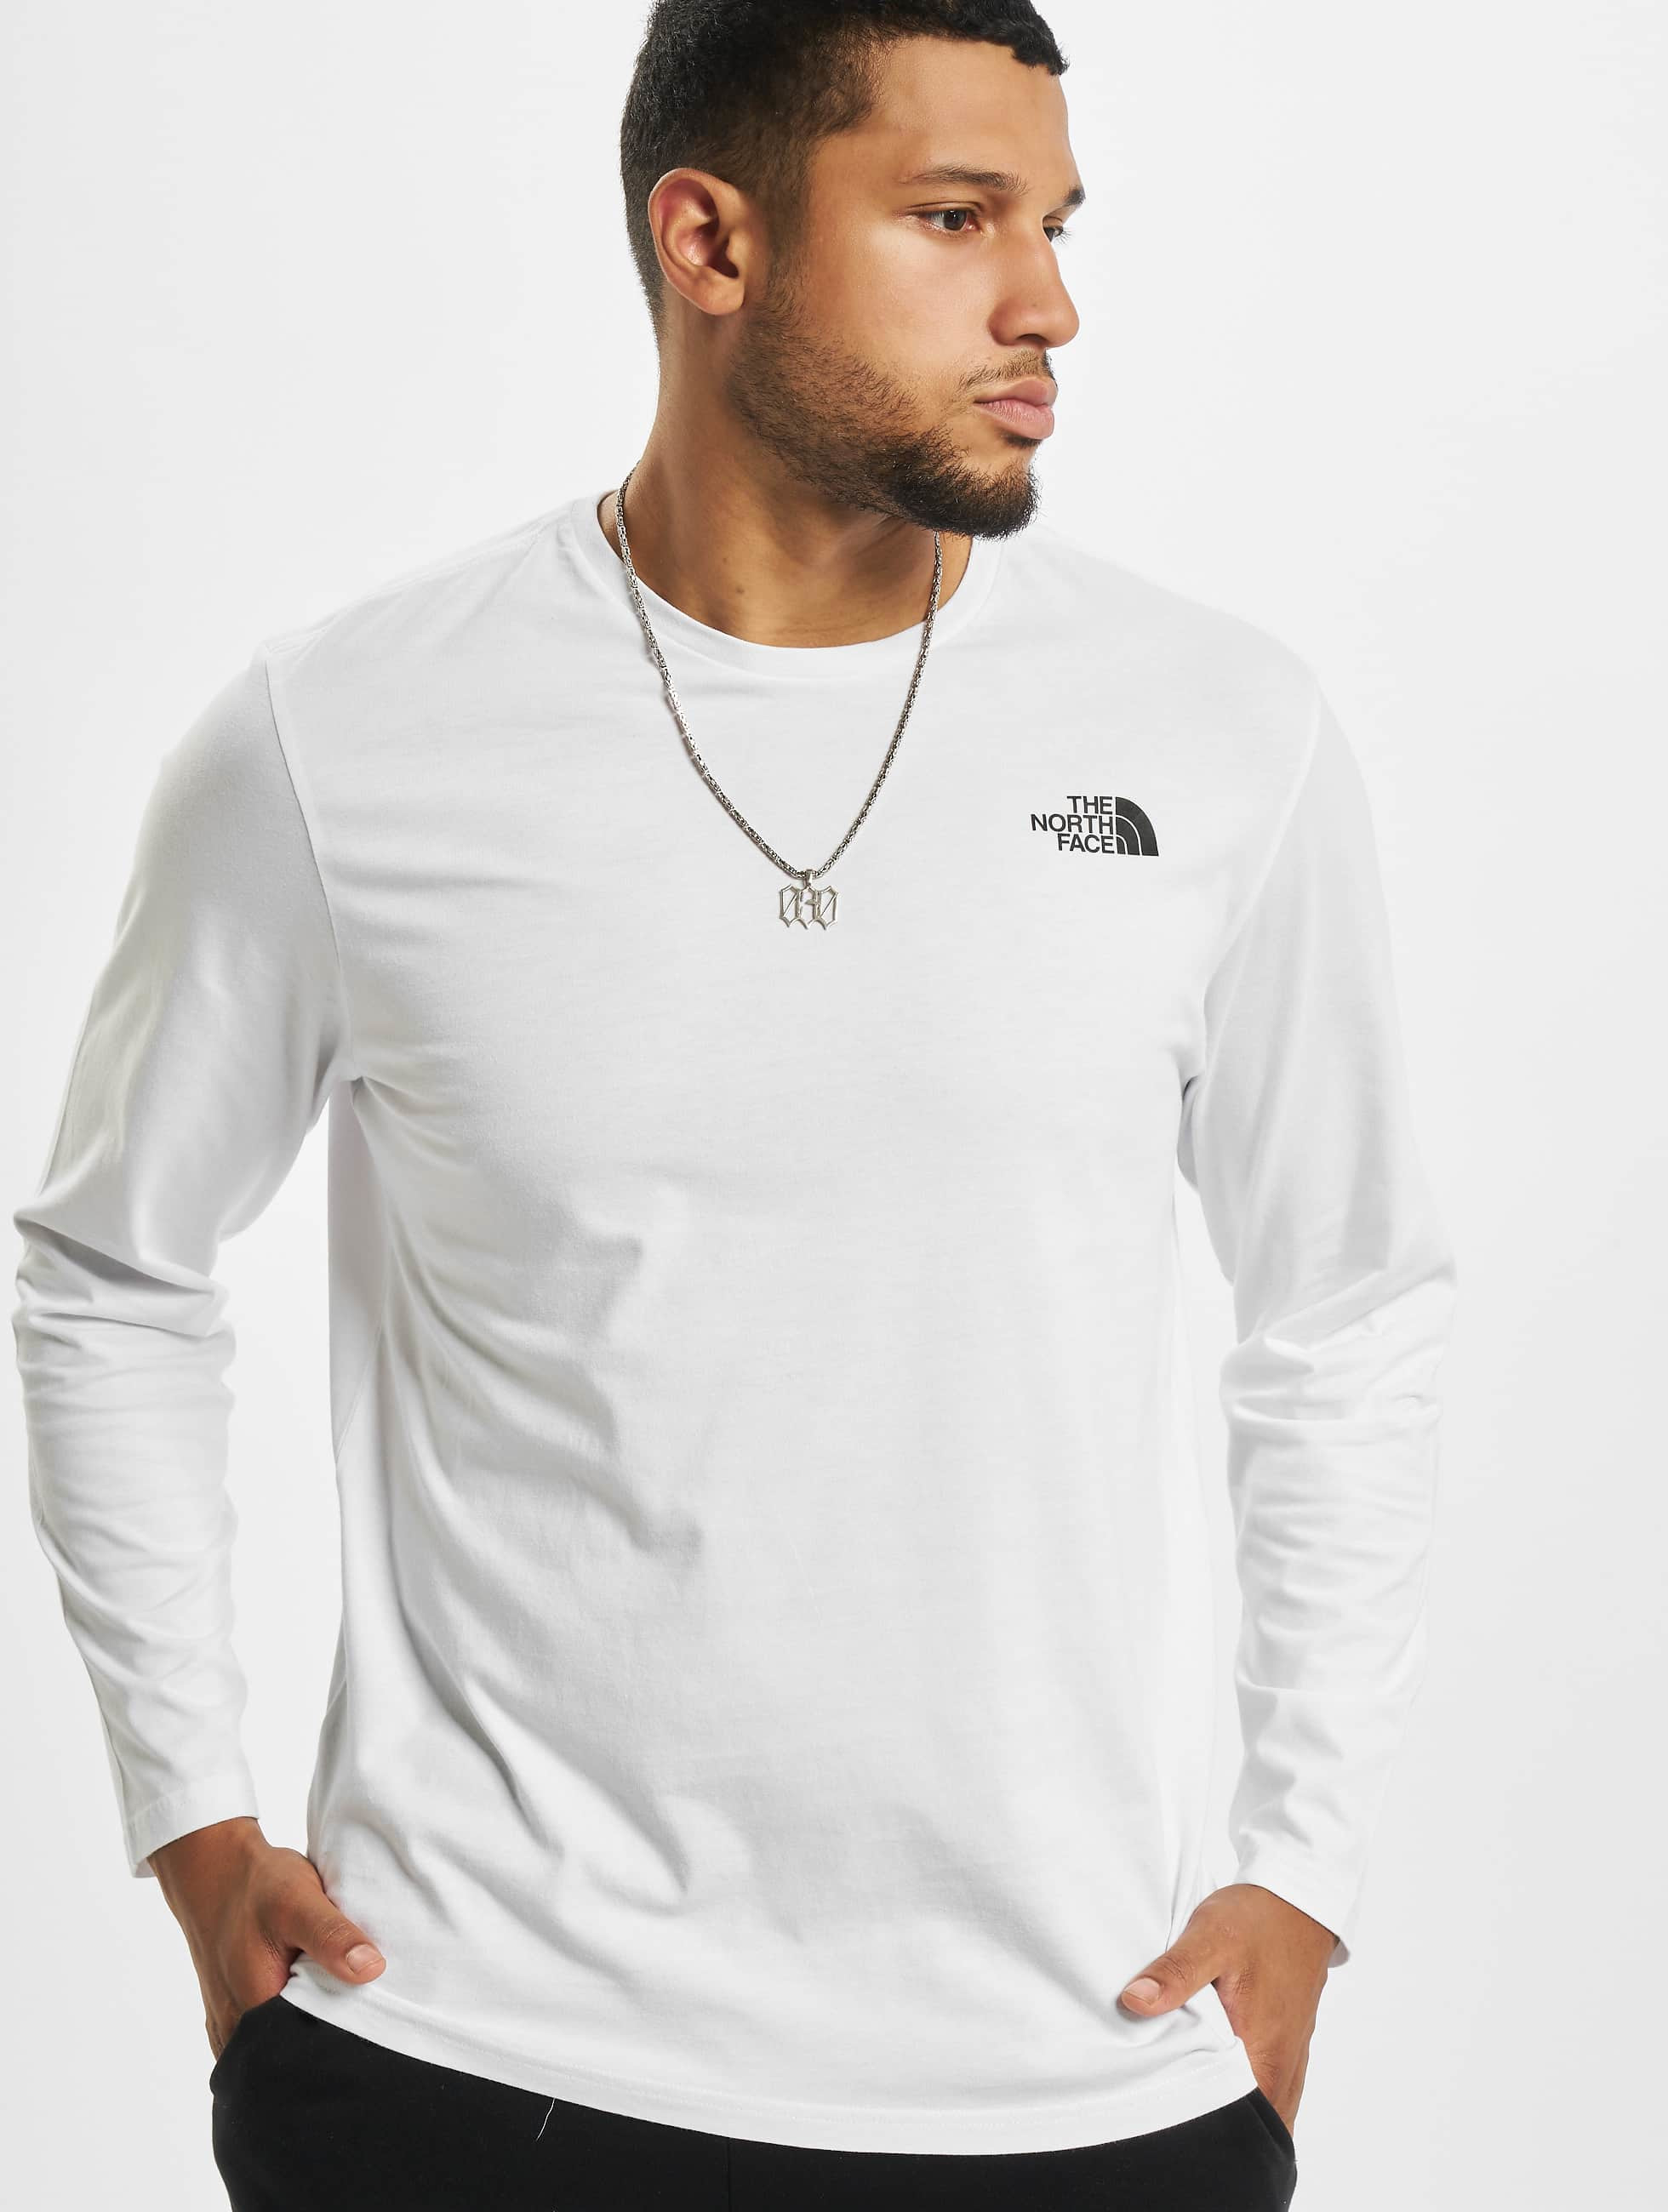 Buy > tee shirt manche longue the north face > in stock